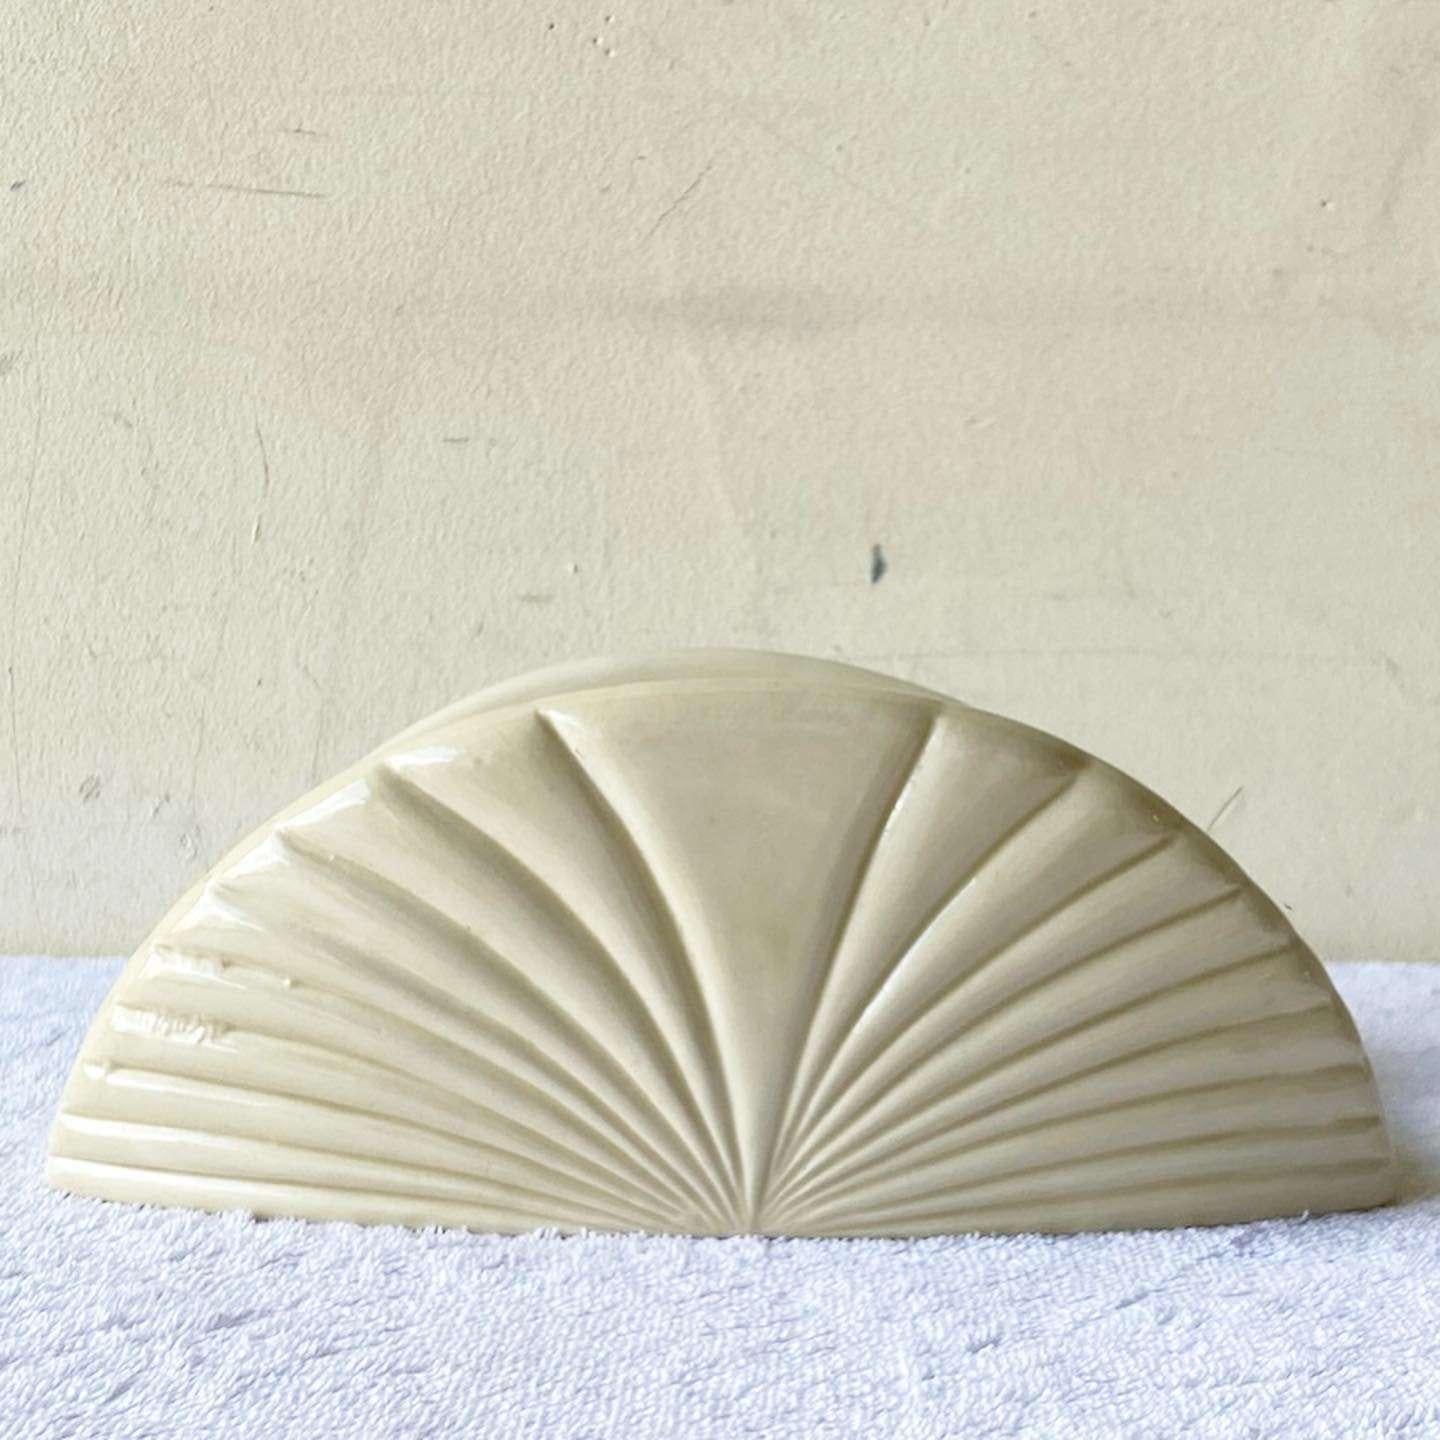 Amazing vintage postmodern ceramic napkin holder. Features a scalloped design with a cream finish.